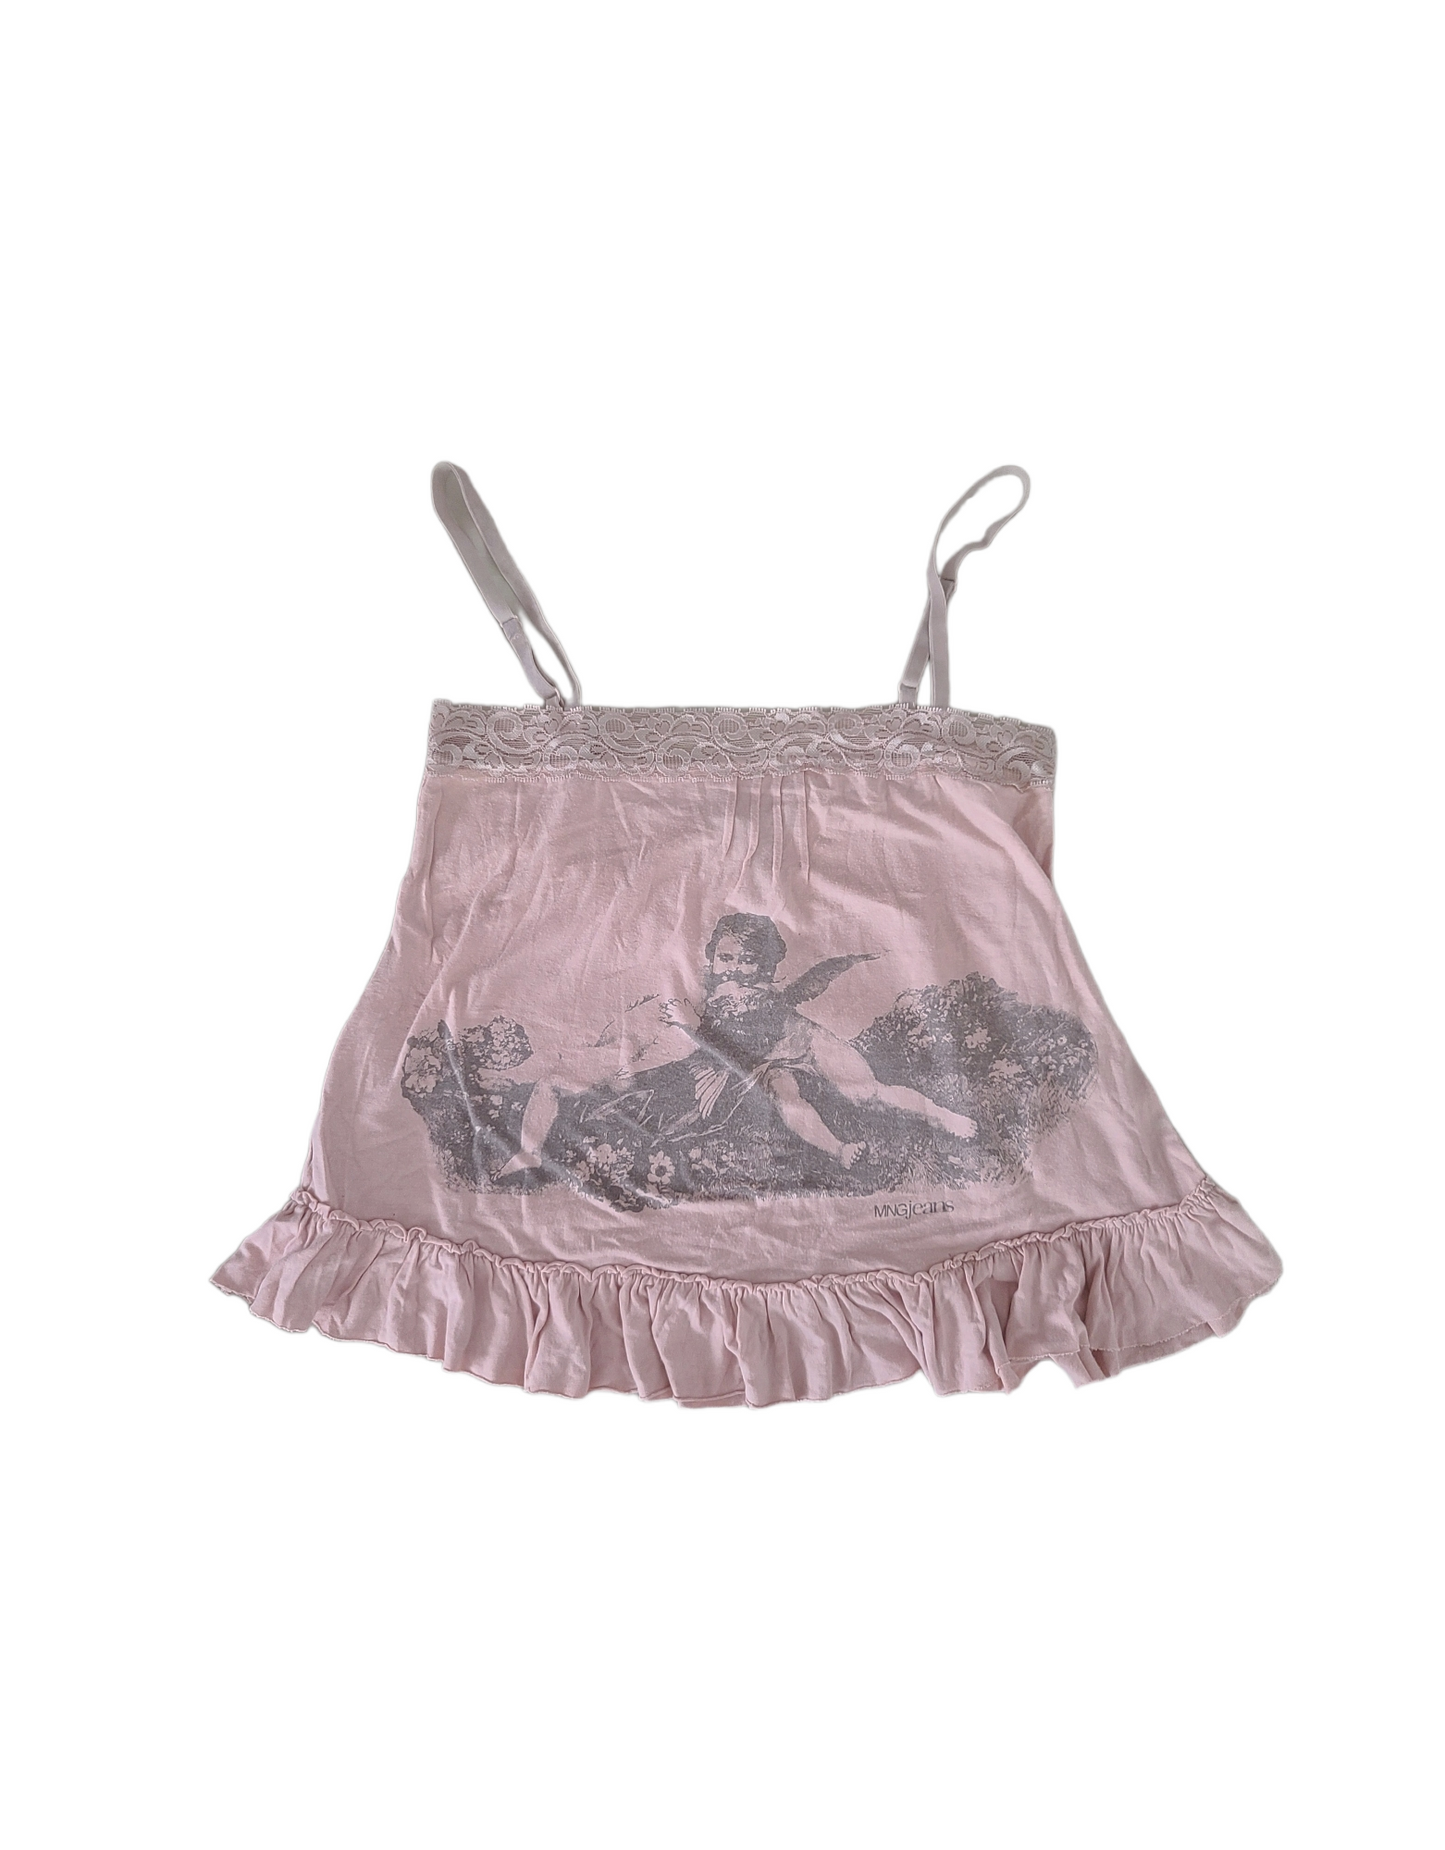 Coquette y2k lace printed pink angelcore top